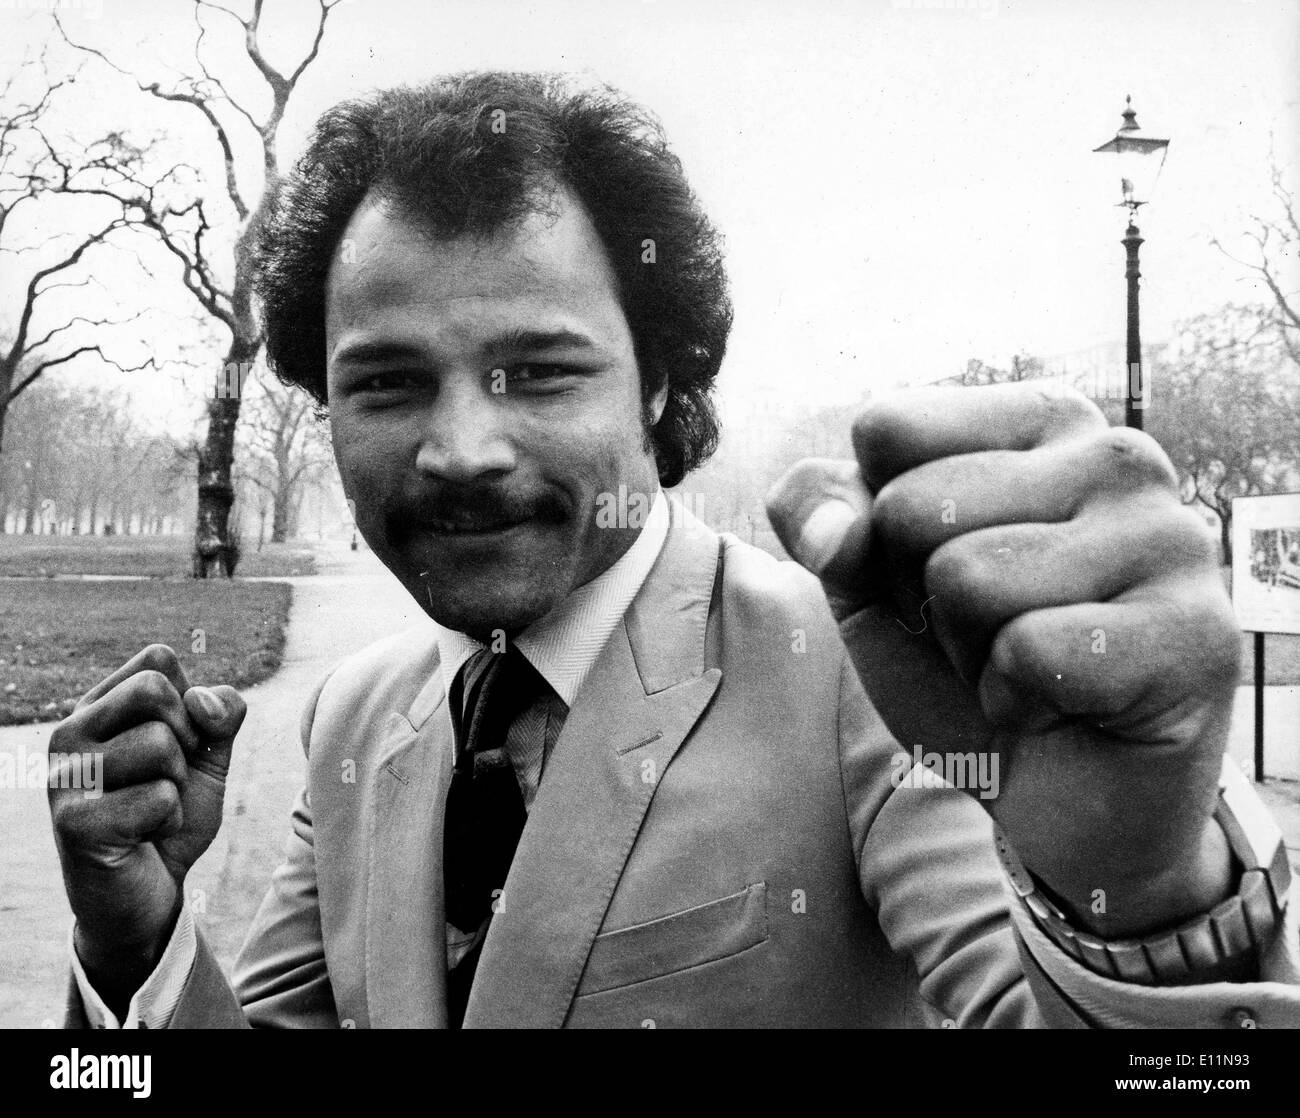 Mar 19, 1979 - London, England, UK - (File Photo) JOHN CONTEH is a former British boxer. He won the middleweight gold medal at the 1970 British Commonwealth Games, and he won the WBC Light Heavyweight crown in October 1974. Stock Photo